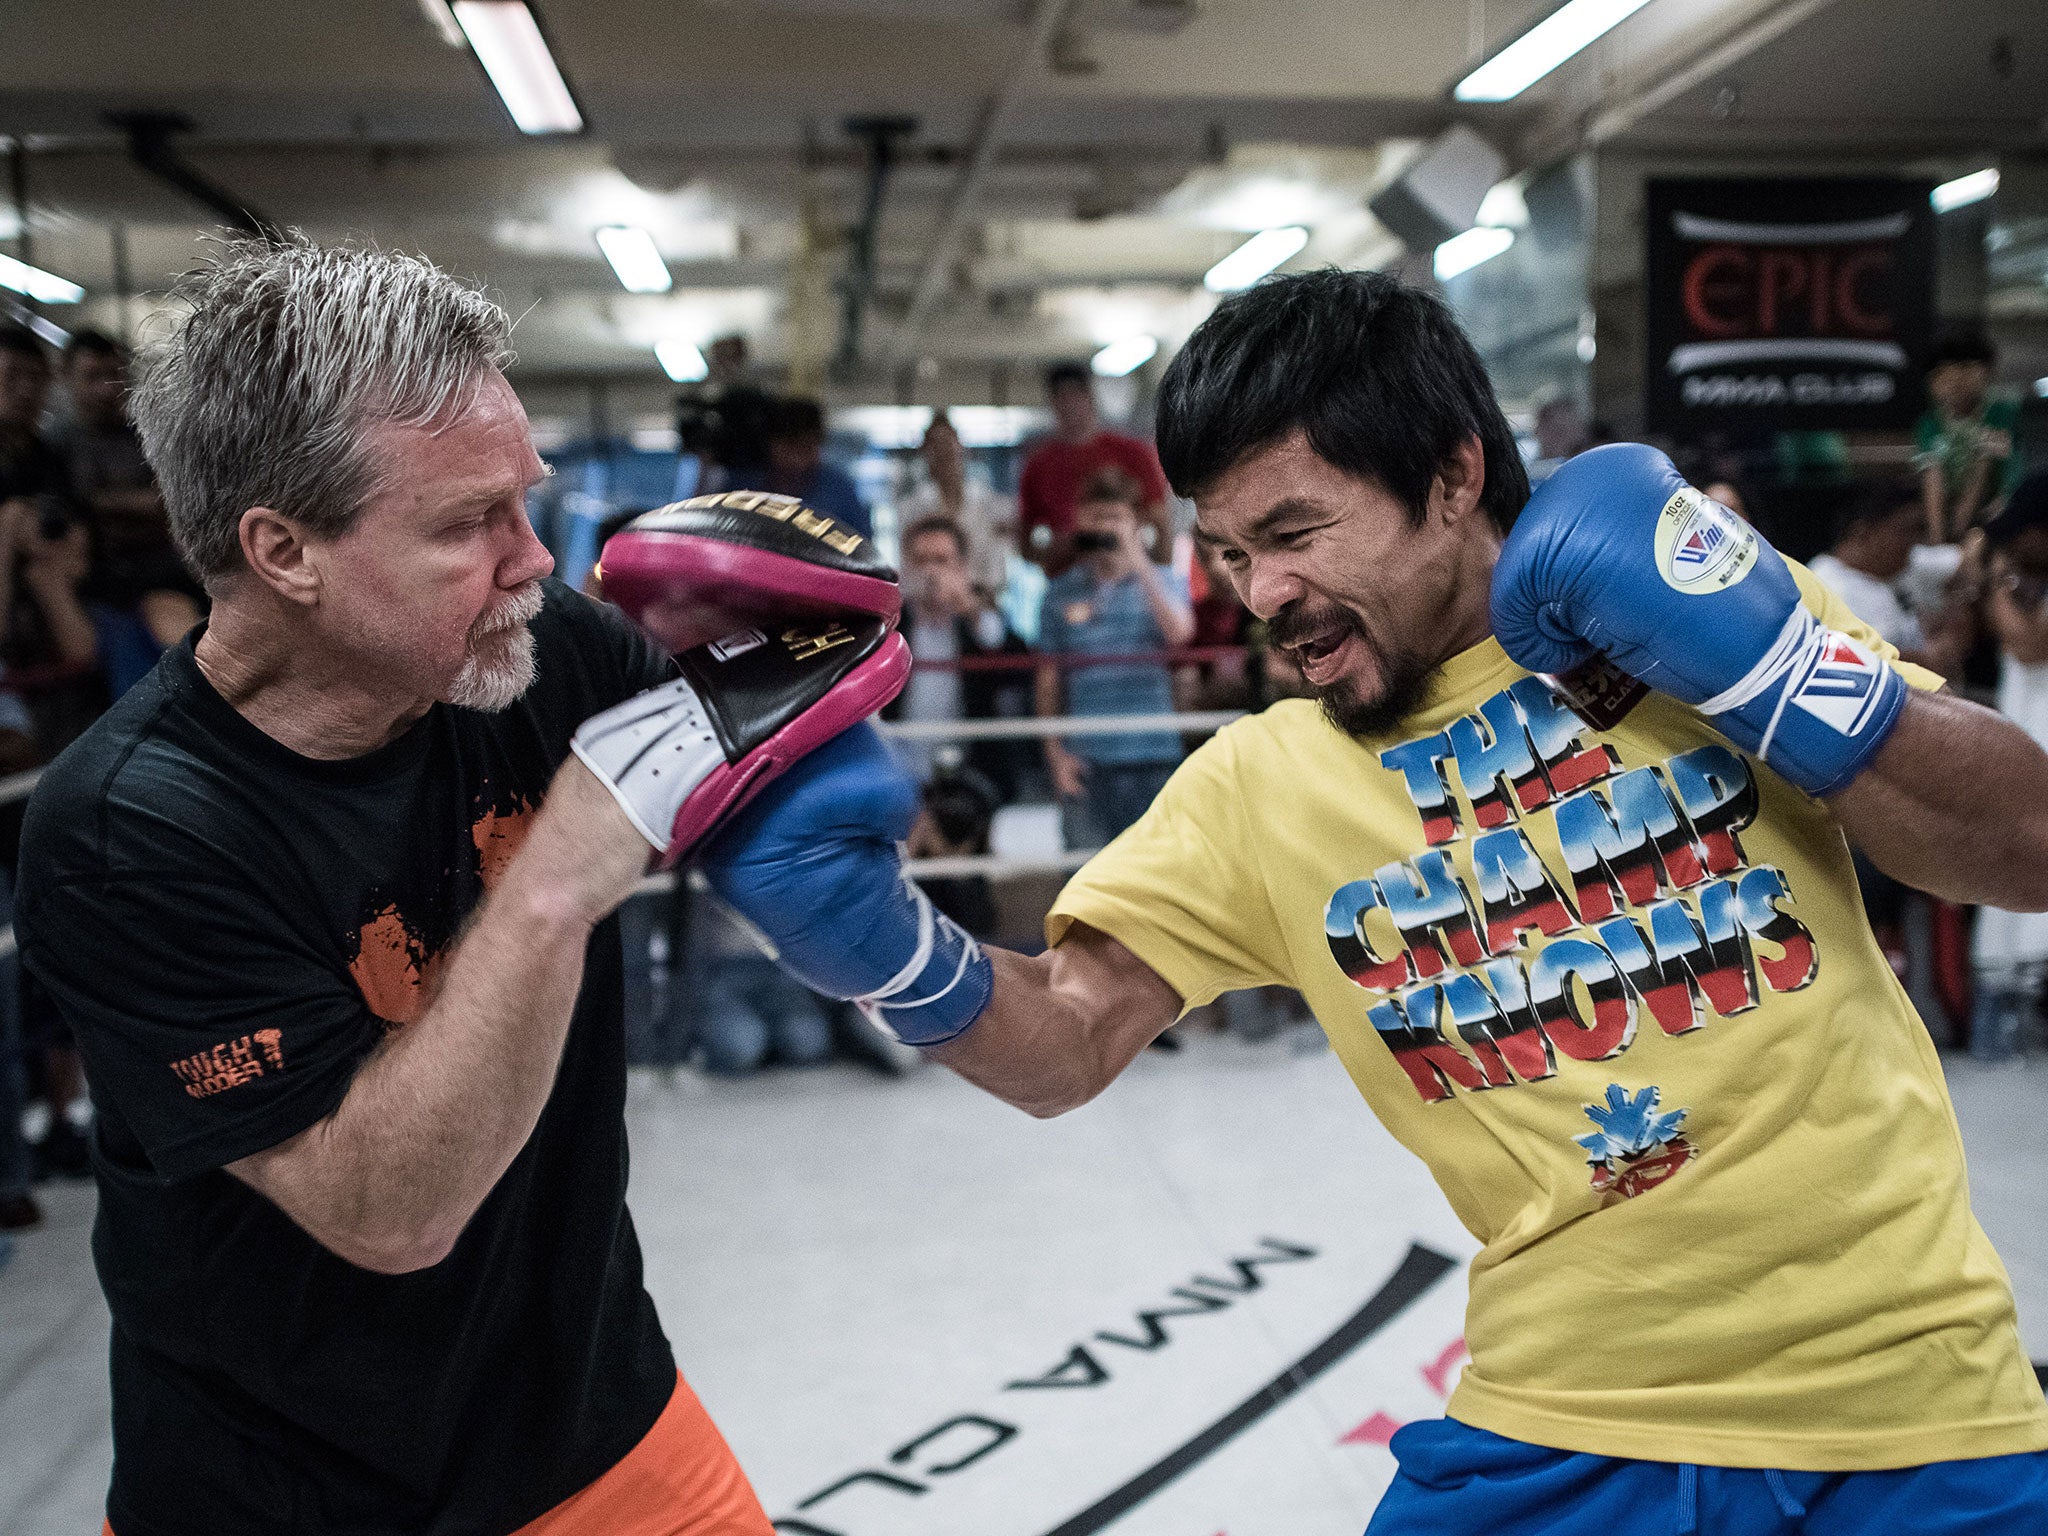 Manny Pacquiao and his trainer Freddy Roach in Hong Kong today